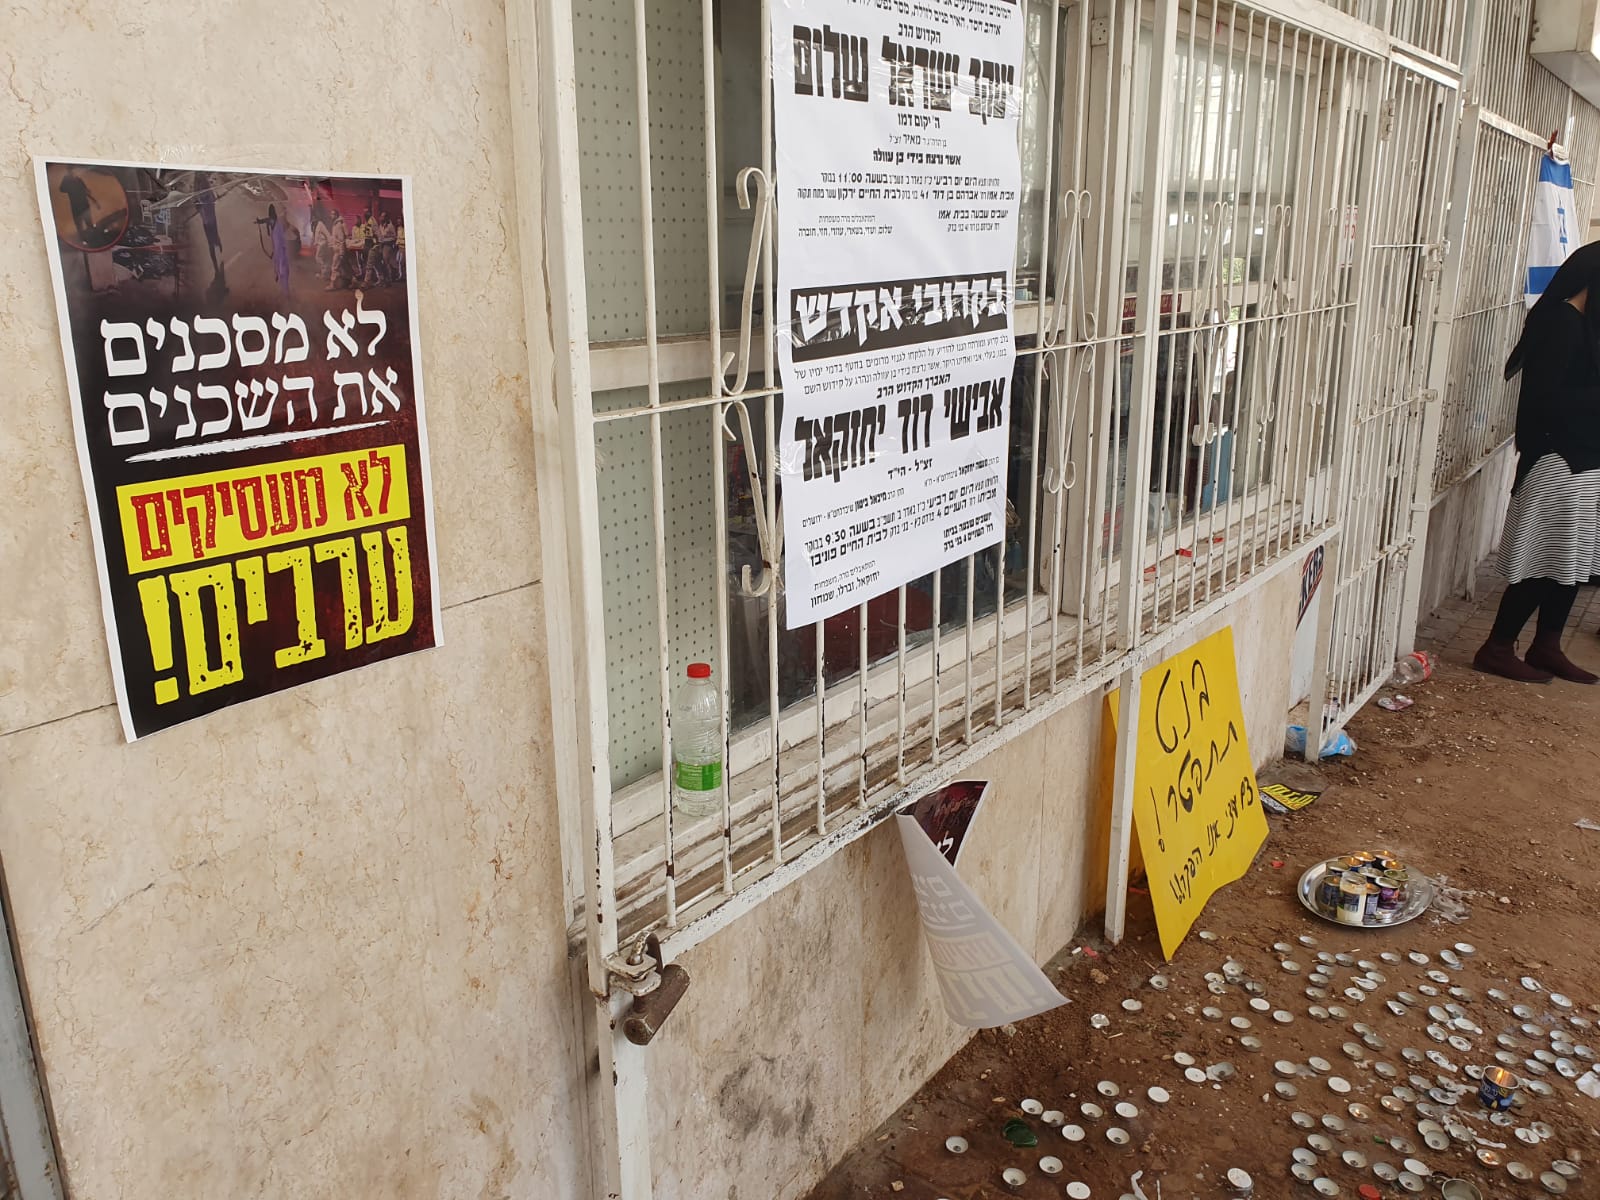 A poster reading "Don't endanger the neighbors, Don't employ Arabs!" at the site of a shooting attack by a Palestinian gunman from the West Bank, in Bnei Brak, March 30, 2022. (Oren Ziv)